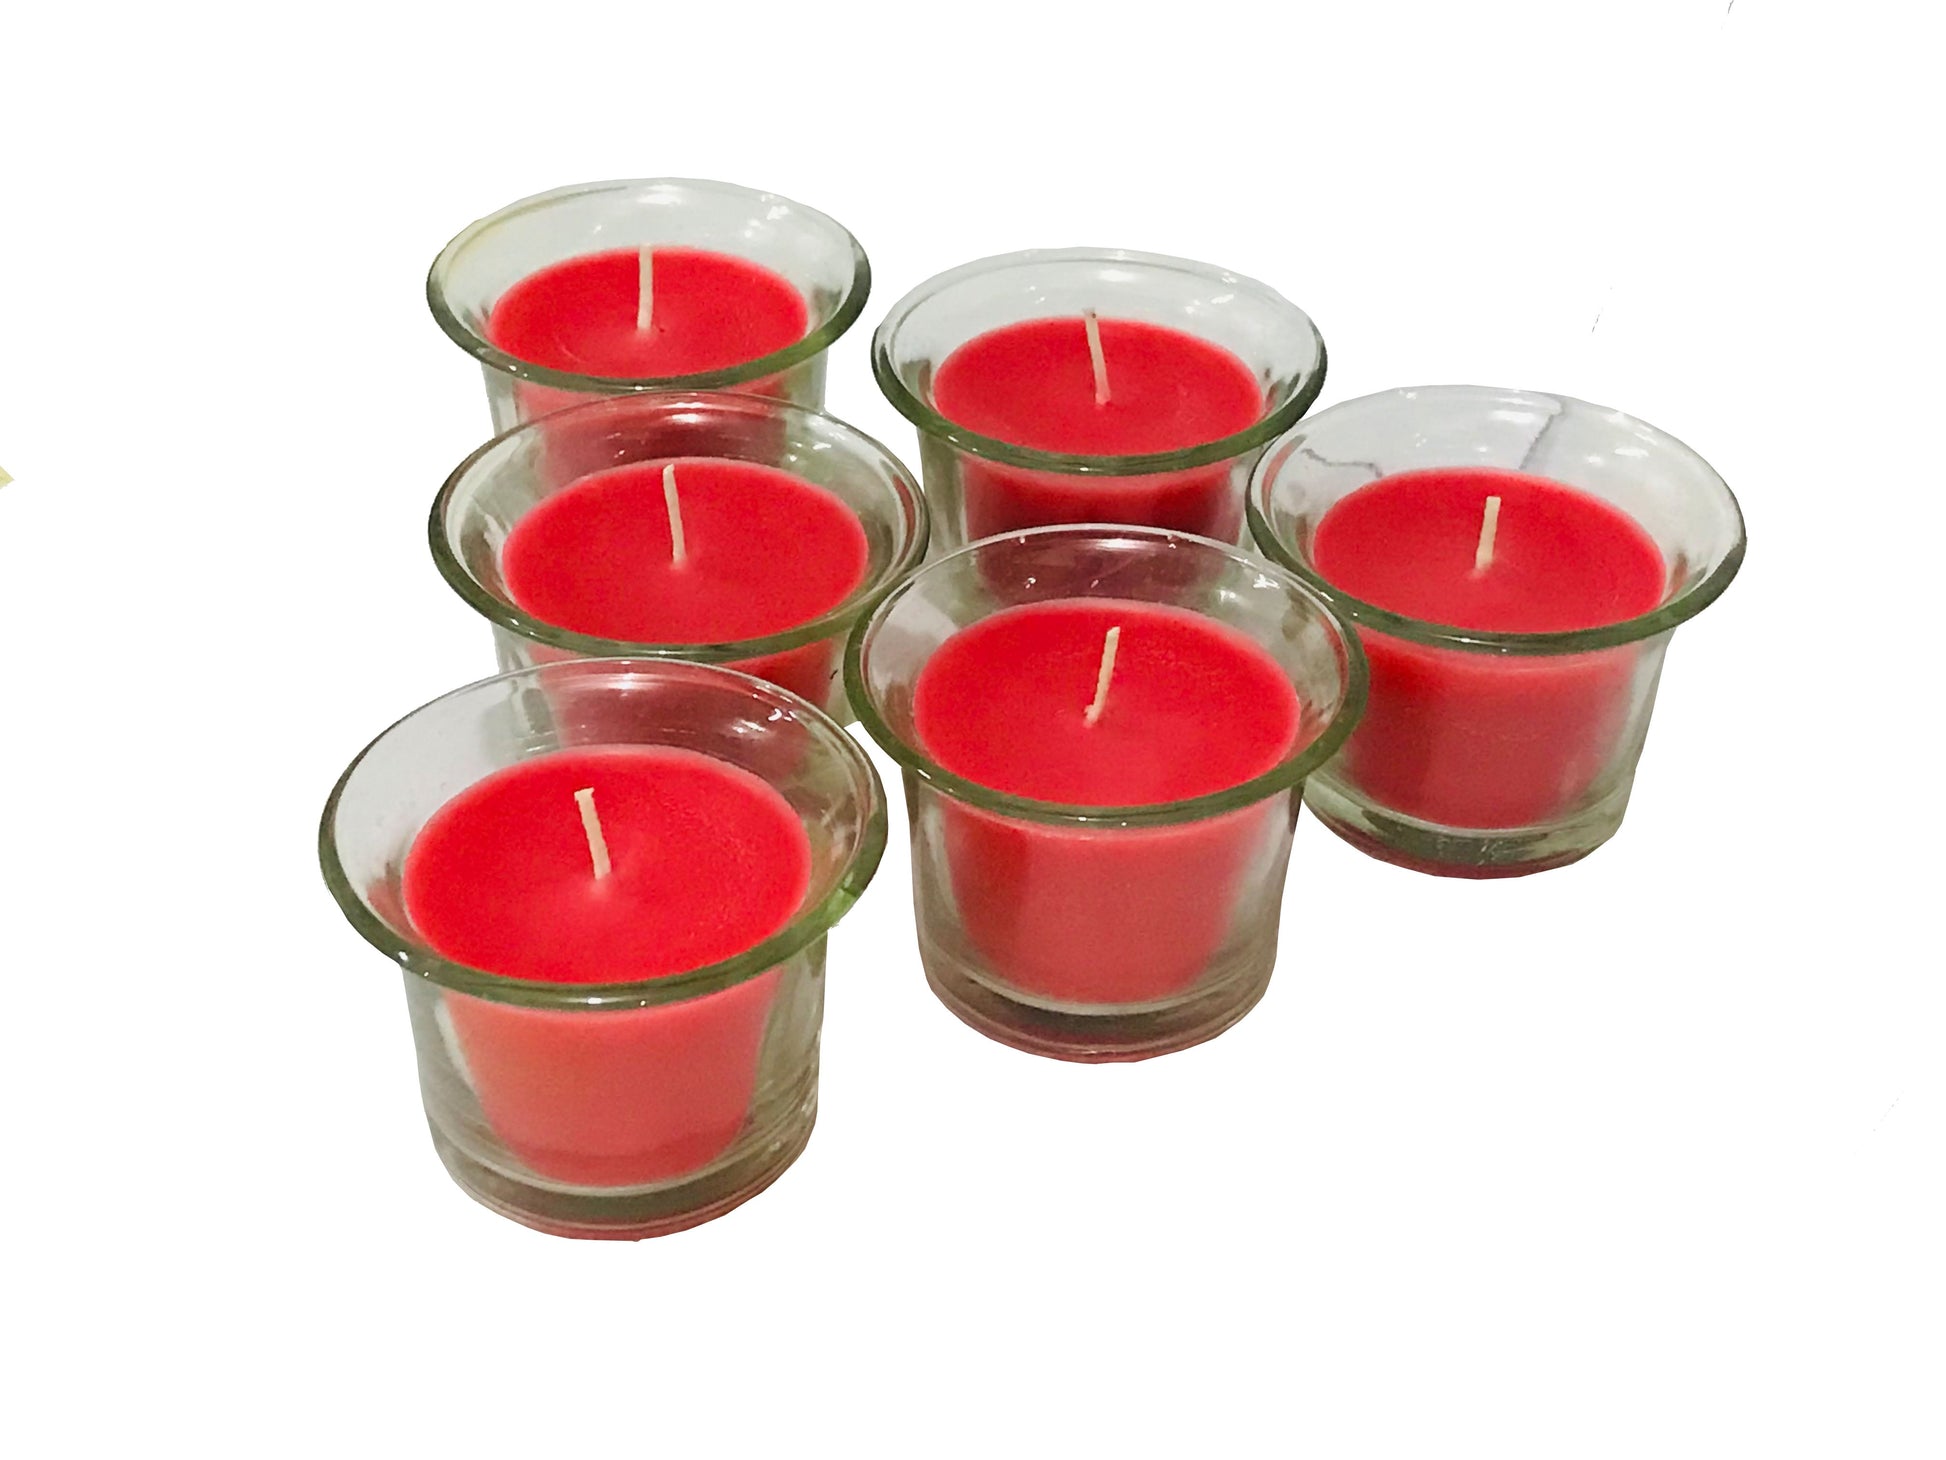 Hosley Highly Fragranced Apple Cinamon Filled Votive Glass Candles / Decoration Candles, Pack of 6, Red